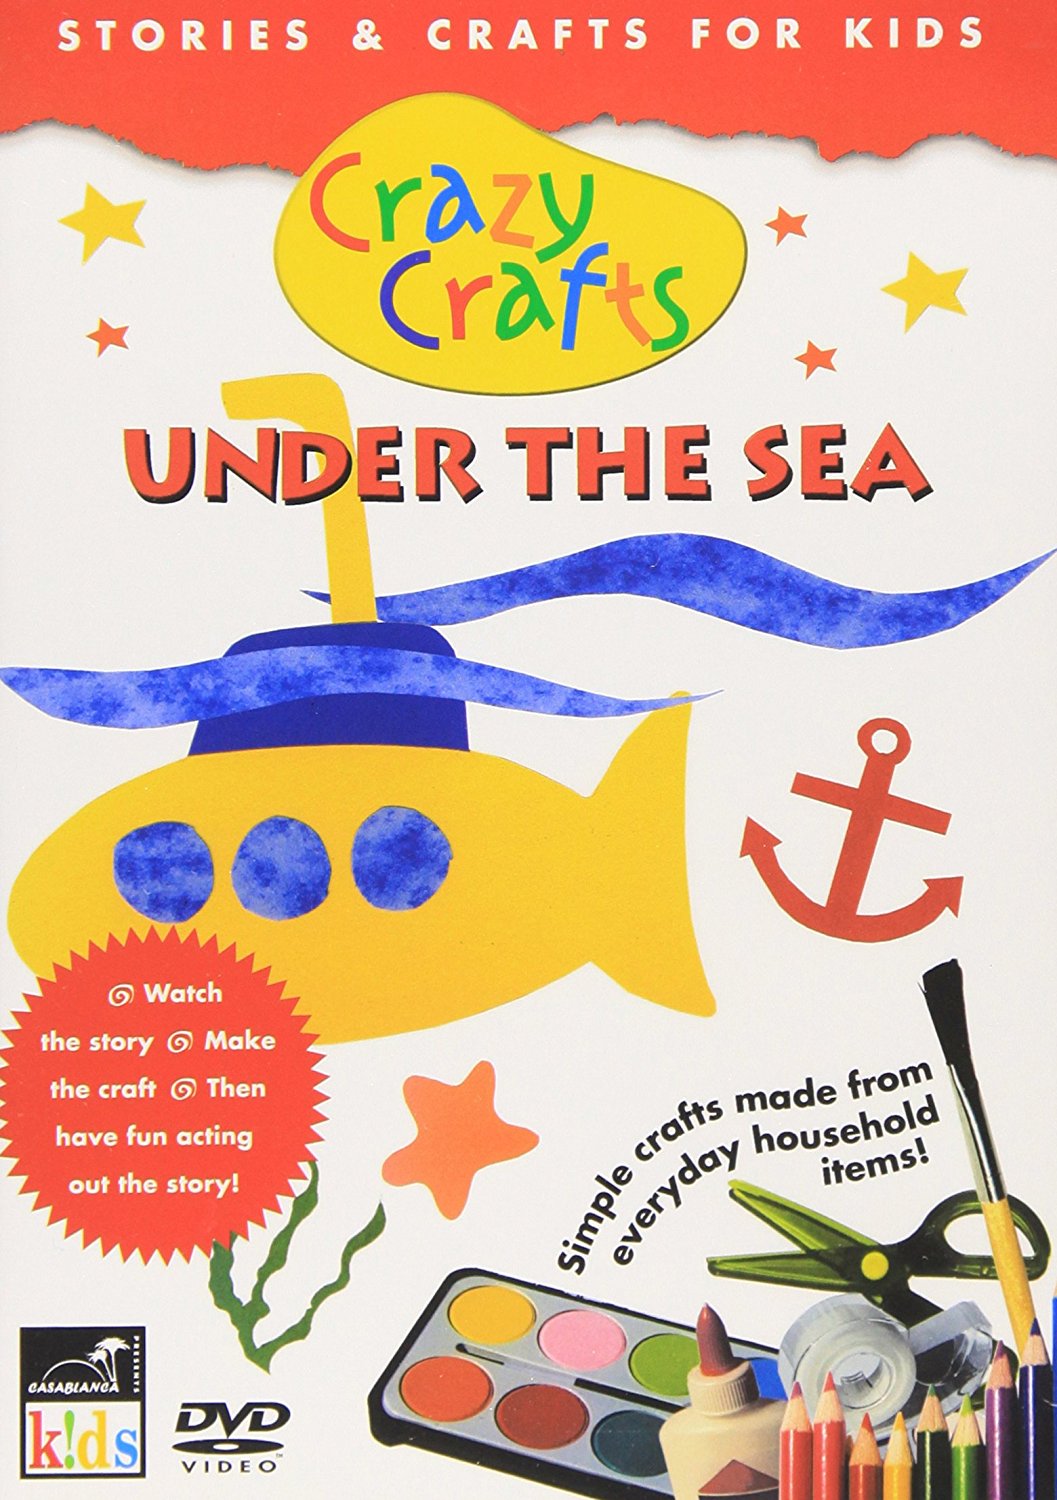 Under The Sea - Stories And Crafts For Kids by Crazy Crafts